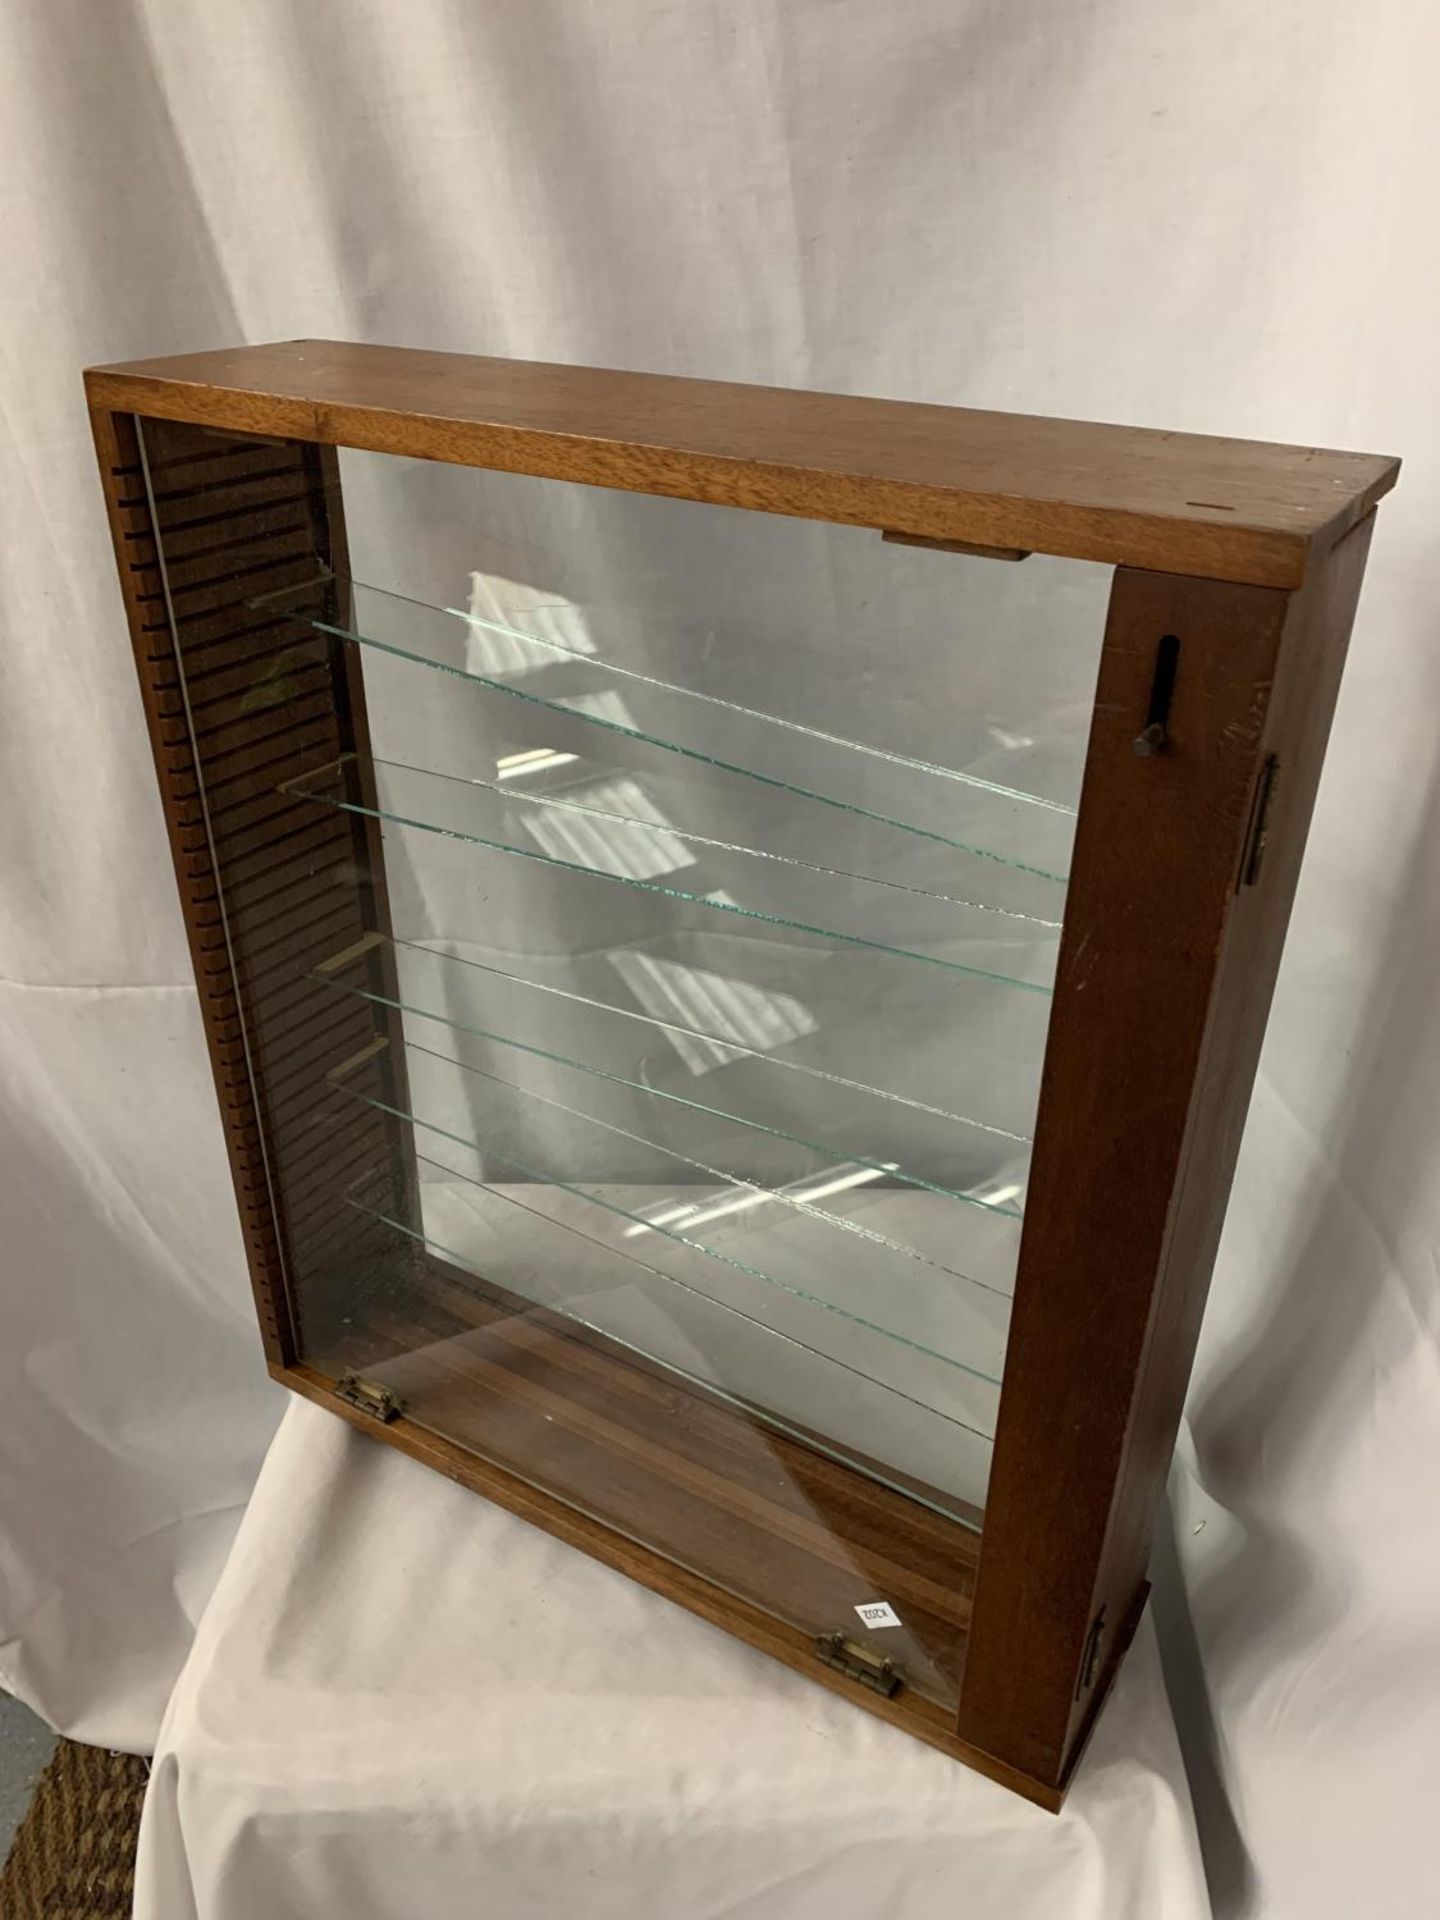 A WOODEN DISPLAY CABINET WITH ADJUSTABLE GLASS SHELVES - Image 2 of 3